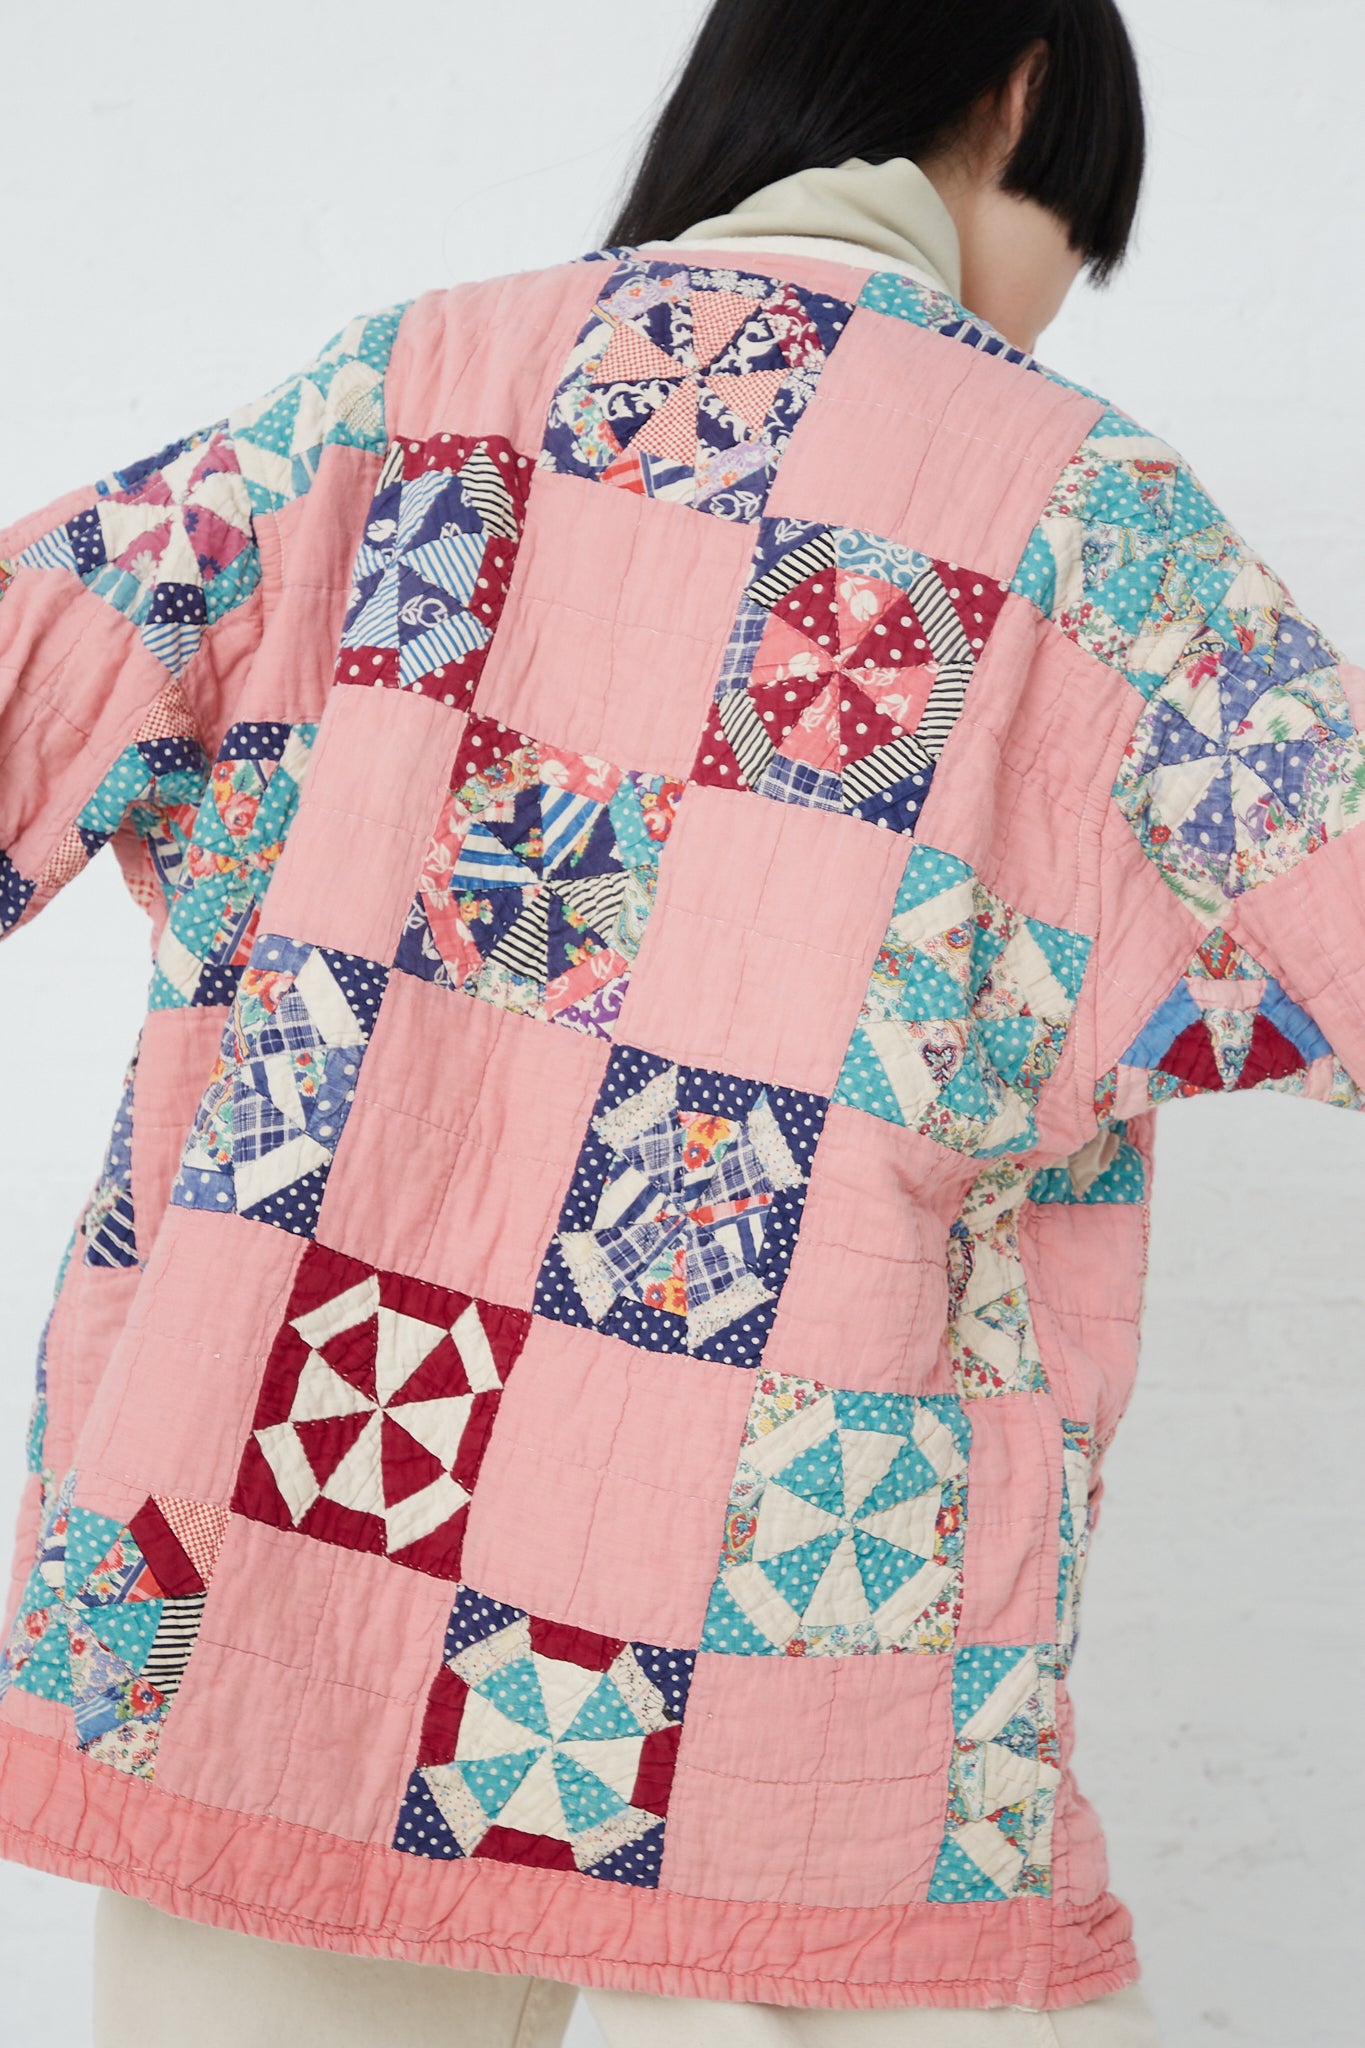 The back of a woman wearing an As Ever Quilt Jacket in Pink.